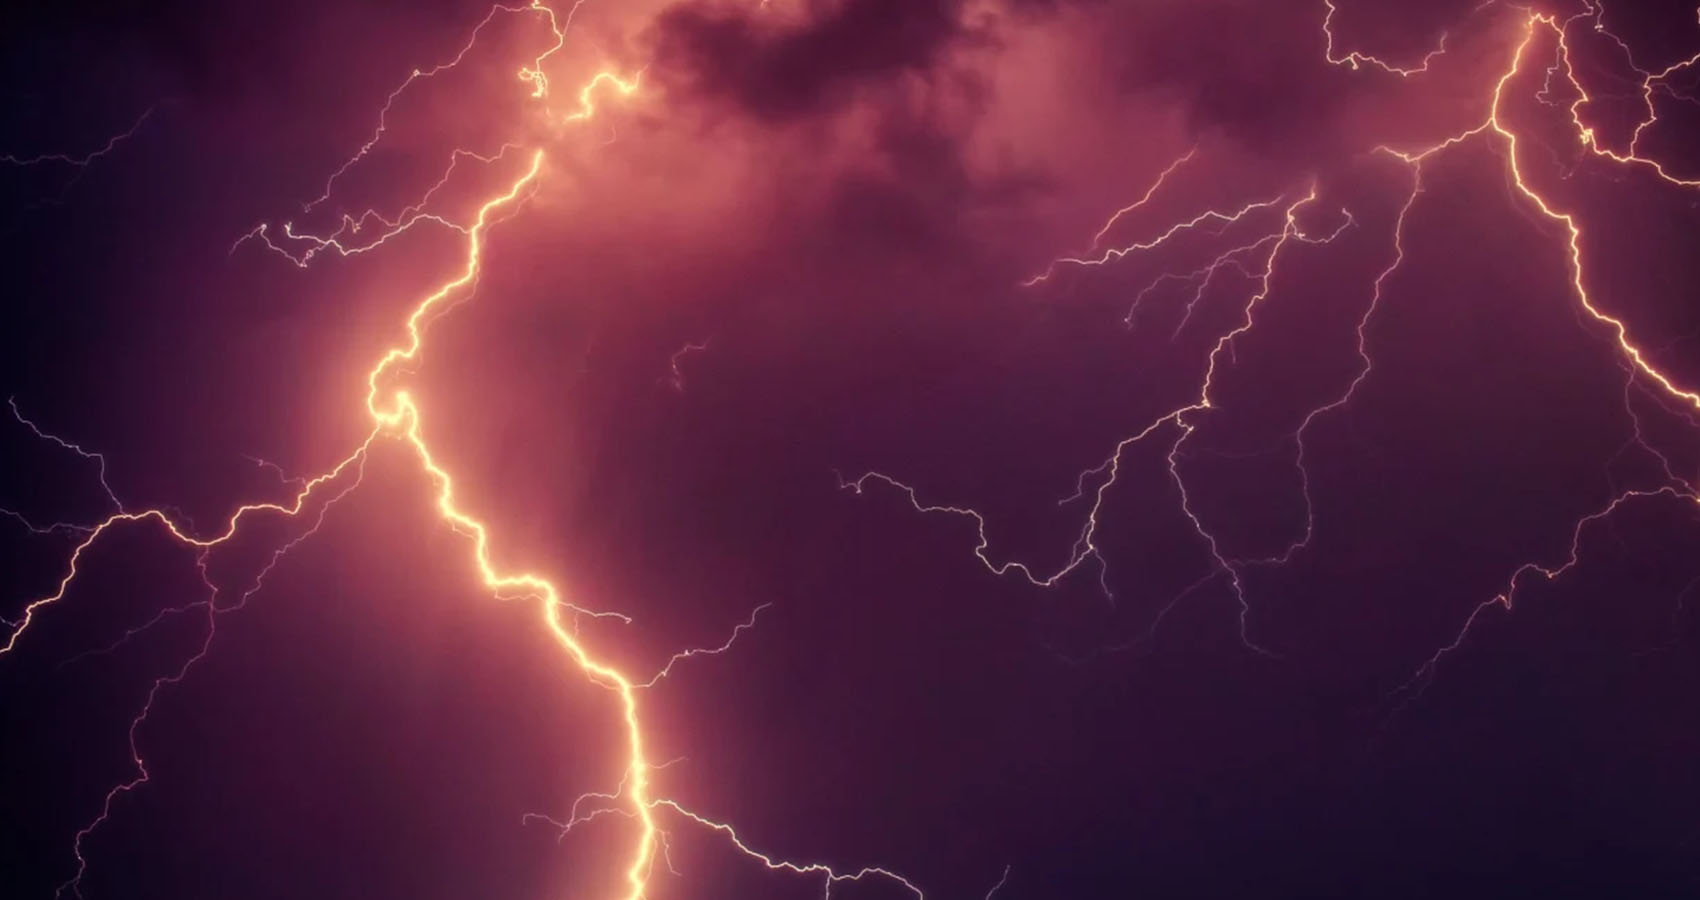 hard to believe facts - Lightning bolts can reach temperatures 5 times hotter than the surface of the sun.